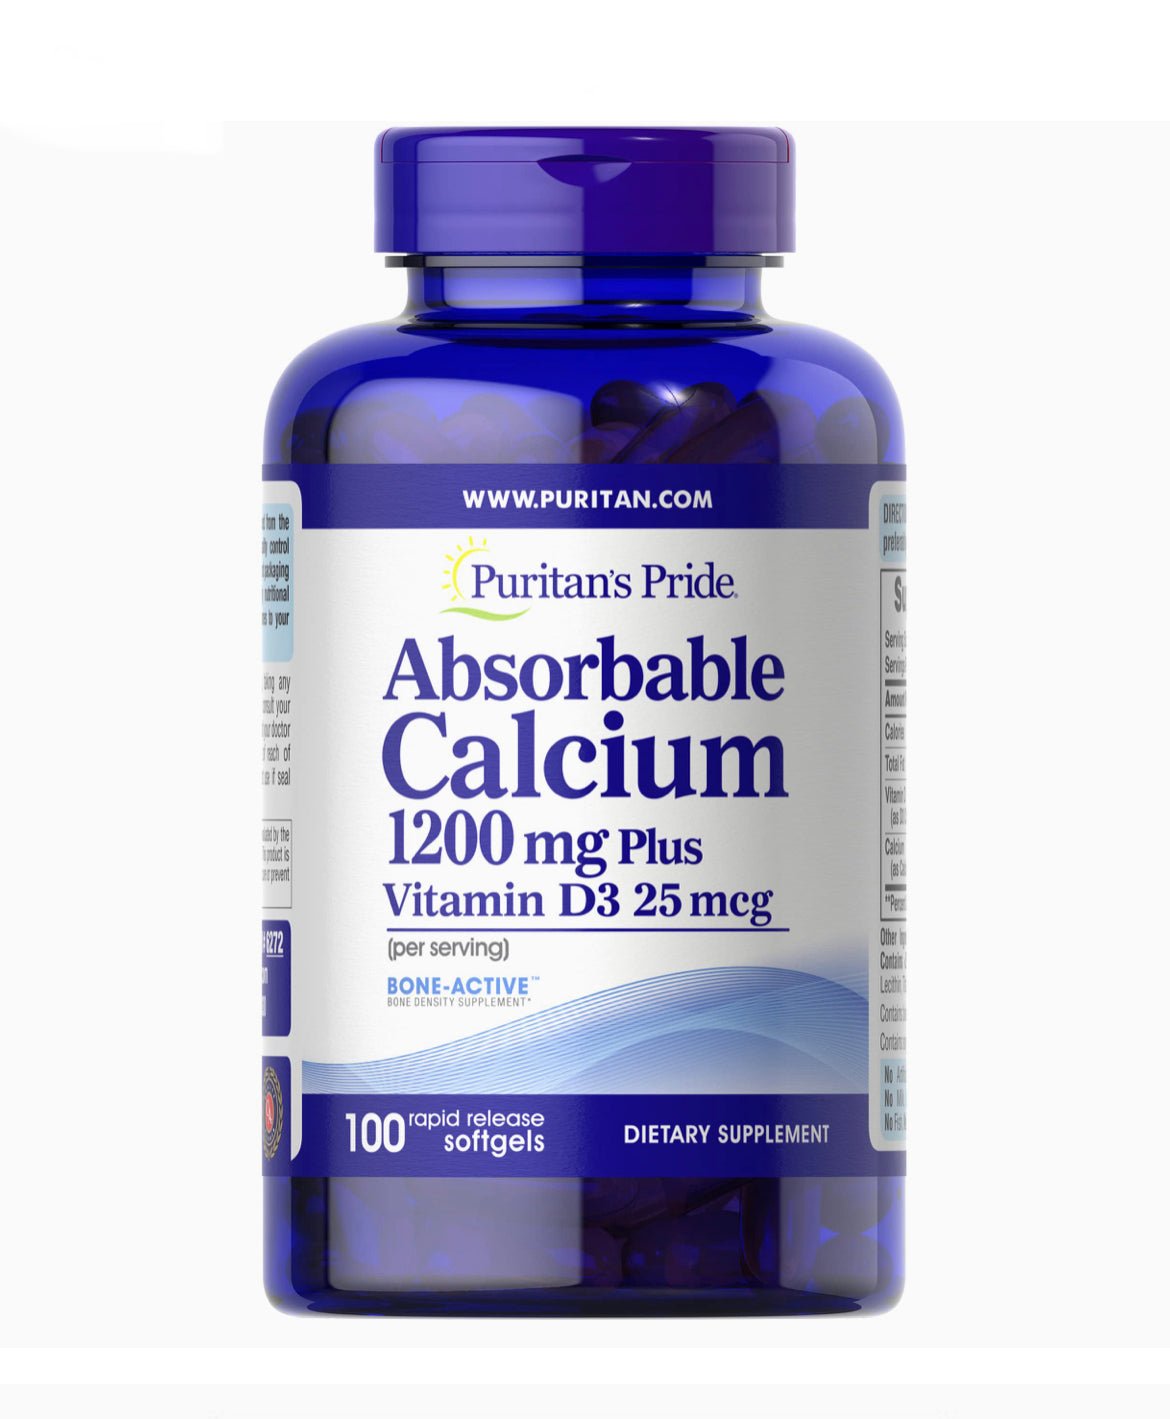 Puritan's Pride Absorbable Calcium 1200mg with Vitamin D3 25mcg 100 Softgels - Ome's Beauty Mart